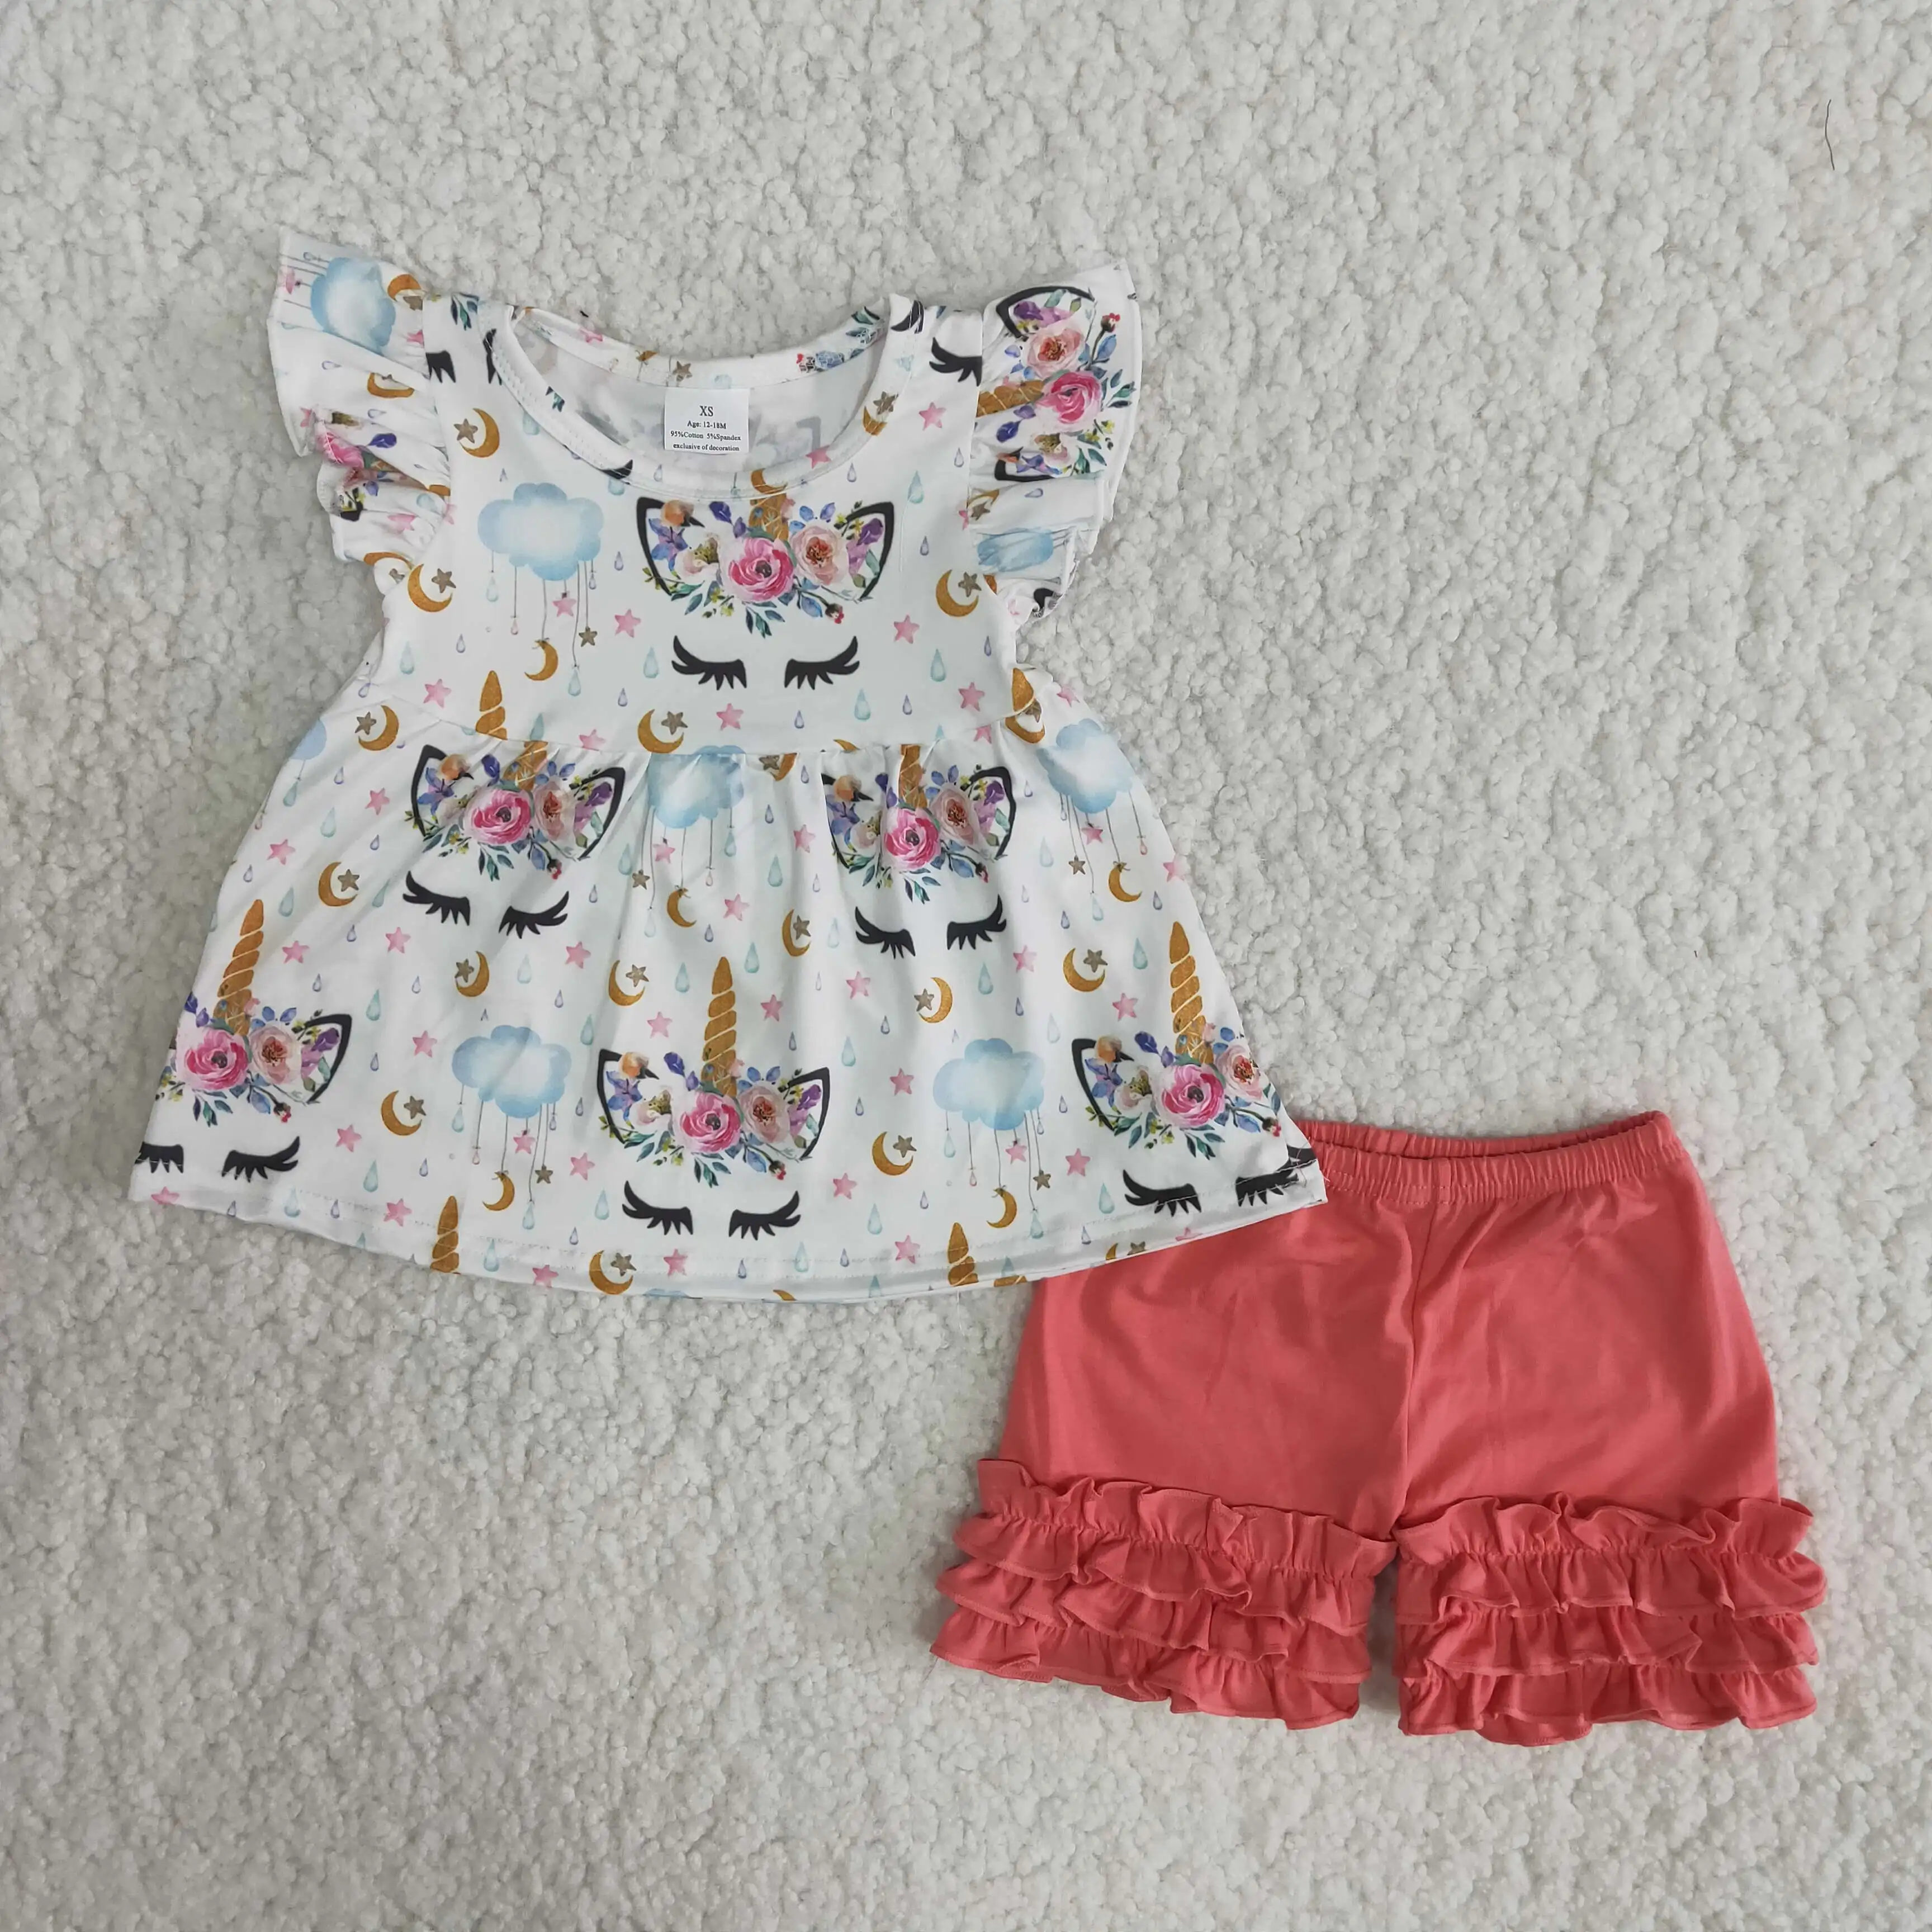 

RTS print kids clothes fashion flutter sleeve tunic icing ruffle shorts little baby girls outfits boutique clothing sets